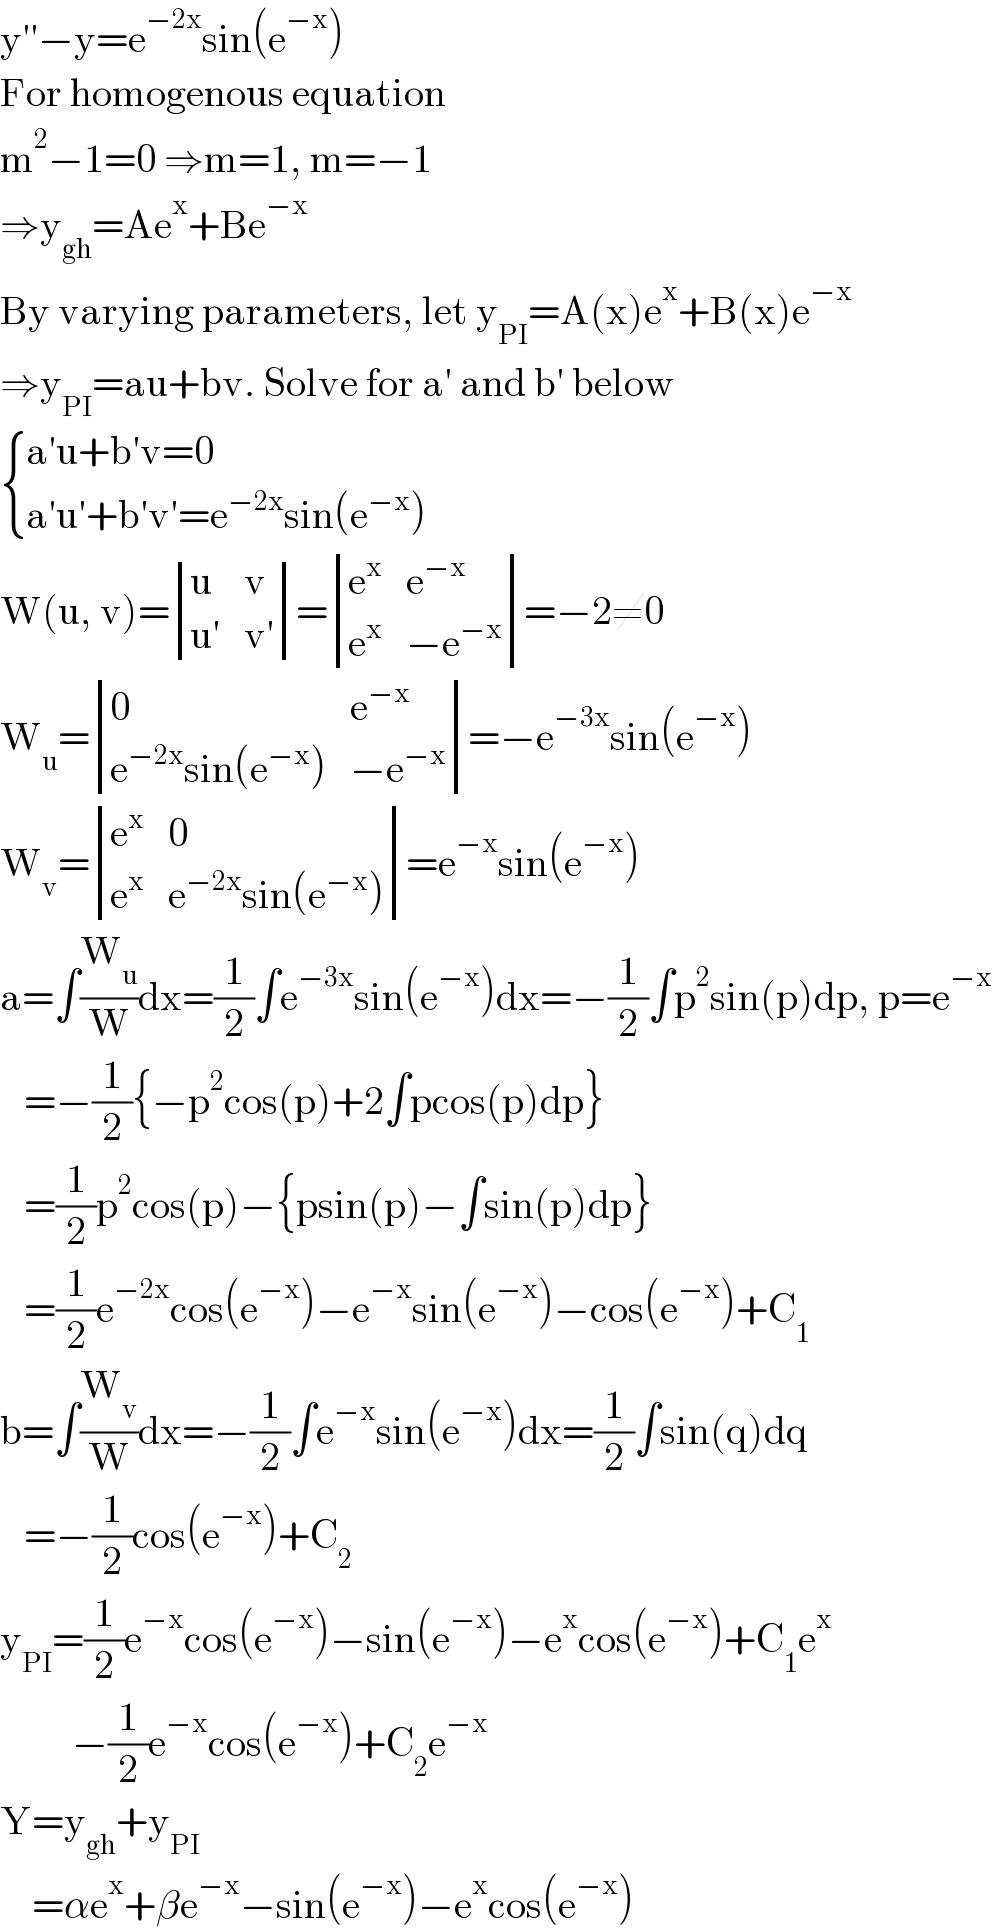 y′′−y=e^(−2x) sin(e^(−x) )  For homogenous equation  m^2 −1=0 ⇒m=1, m=−1  ⇒y_(gh) =Ae^x +Be^(−x)   By varying parameters, let y_(PI) =A(x)e^x +B(x)e^(−x)   ⇒y_(PI) =au+bv. Solve for a′ and b′ below   { ((a′u+b′v=0)),((a′u′+b′v′=e^(−2x) sin(e^(−x) ))) :}  W(u, v)= determinant ((u,v),((u′),(v′)))= determinant ((e^x ,e^(−x) ),(e^x ,(−e^(−x) )))=−2≠0  W_u = determinant ((0,e^(−x) ),((e^(−2x) sin(e^(−x) )),(−e^(−x) )))=−e^(−3x) sin(e^(−x) )  W_v = determinant ((e^x ,0),(e^x ,(e^(−2x) sin(e^(−x) ))))=e^(−x) sin(e^(−x) )  a=∫(W_u /W)dx=(1/2)∫e^(−3x) sin(e^(−x) )dx=−(1/2)∫p^2 sin(p)dp, p=e^(−x)      =−(1/2){−p^2 cos(p)+2∫pcos(p)dp}     =(1/2)p^2 cos(p)−{psin(p)−∫sin(p)dp}     =(1/2)e^(−2x) cos(e^(−x) )−e^(−x) sin(e^(−x) )−cos(e^(−x) )+C_1   b=∫(W_v /W)dx=−(1/2)∫e^(−x) sin(e^(−x) )dx=(1/2)∫sin(q)dq     =−(1/2)cos(e^(−x) )+C_2   y_(PI) =(1/2)e^(−x) cos(e^(−x) )−sin(e^(−x) )−e^x cos(e^(−x) )+C_1 e^x            −(1/2)e^(−x) cos(e^(−x) )+C_2 e^(−x)   Y=y_(gh) +y_(PI)       =αe^x +βe^(−x) −sin(e^(−x) )−e^x cos(e^(−x) )  